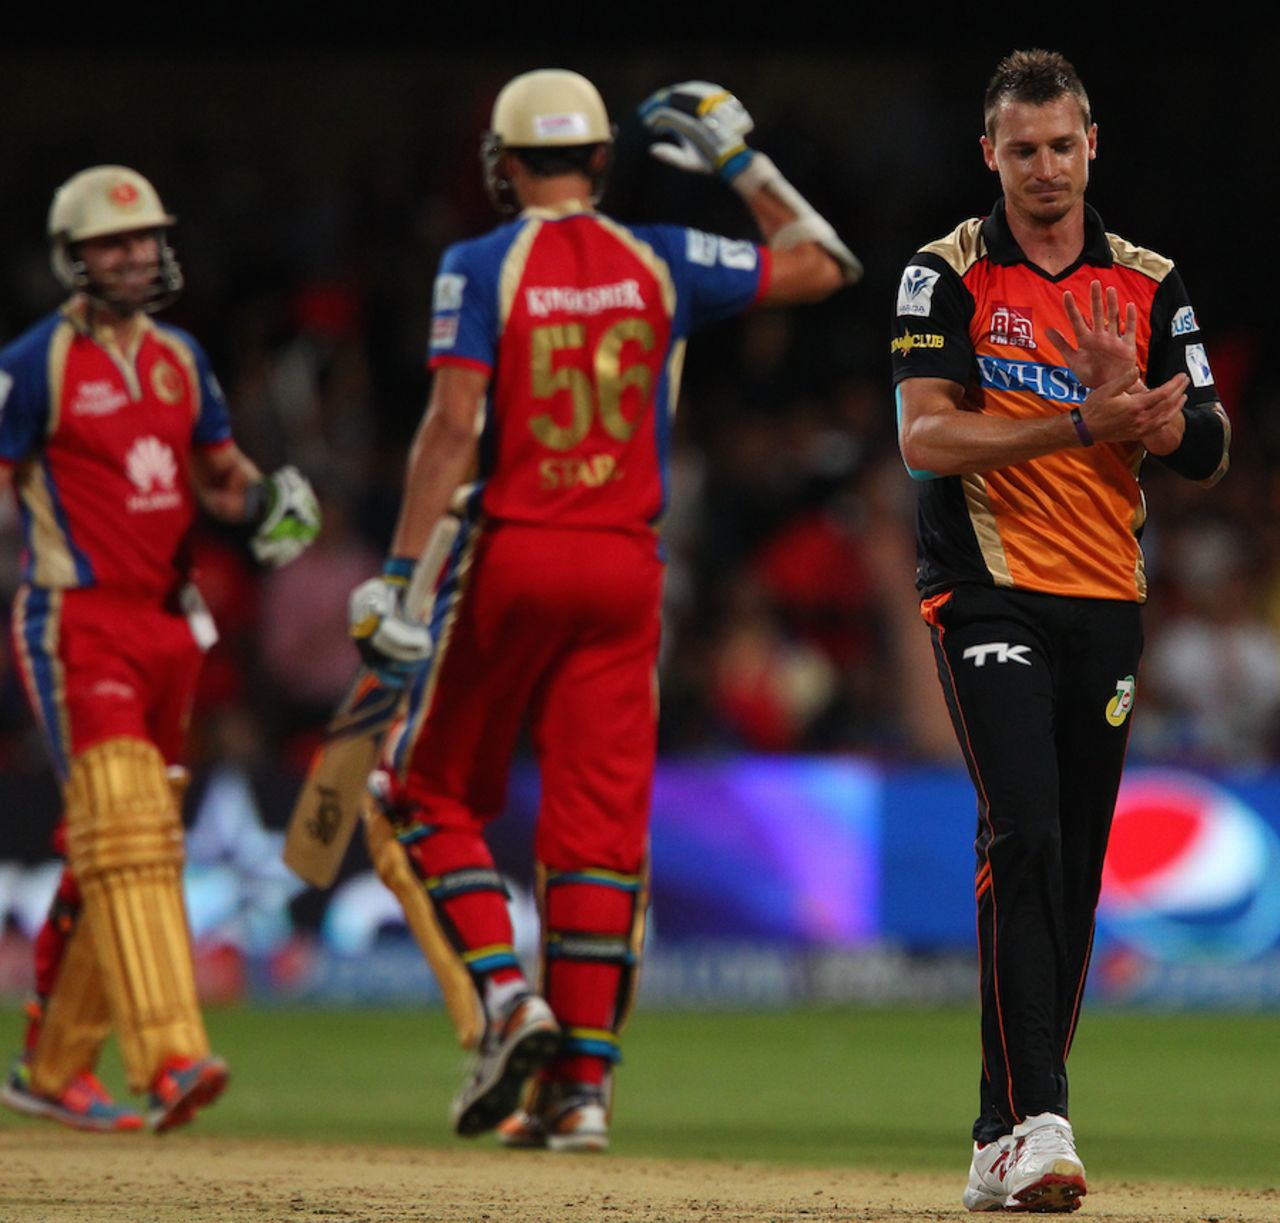 Dale Steyn could only appreciate as AB de Villiers tore into his last over, Royal Challengers Bangalore v Sunrisers Hyderabad, IPL, Bangalore, May 4, 2014